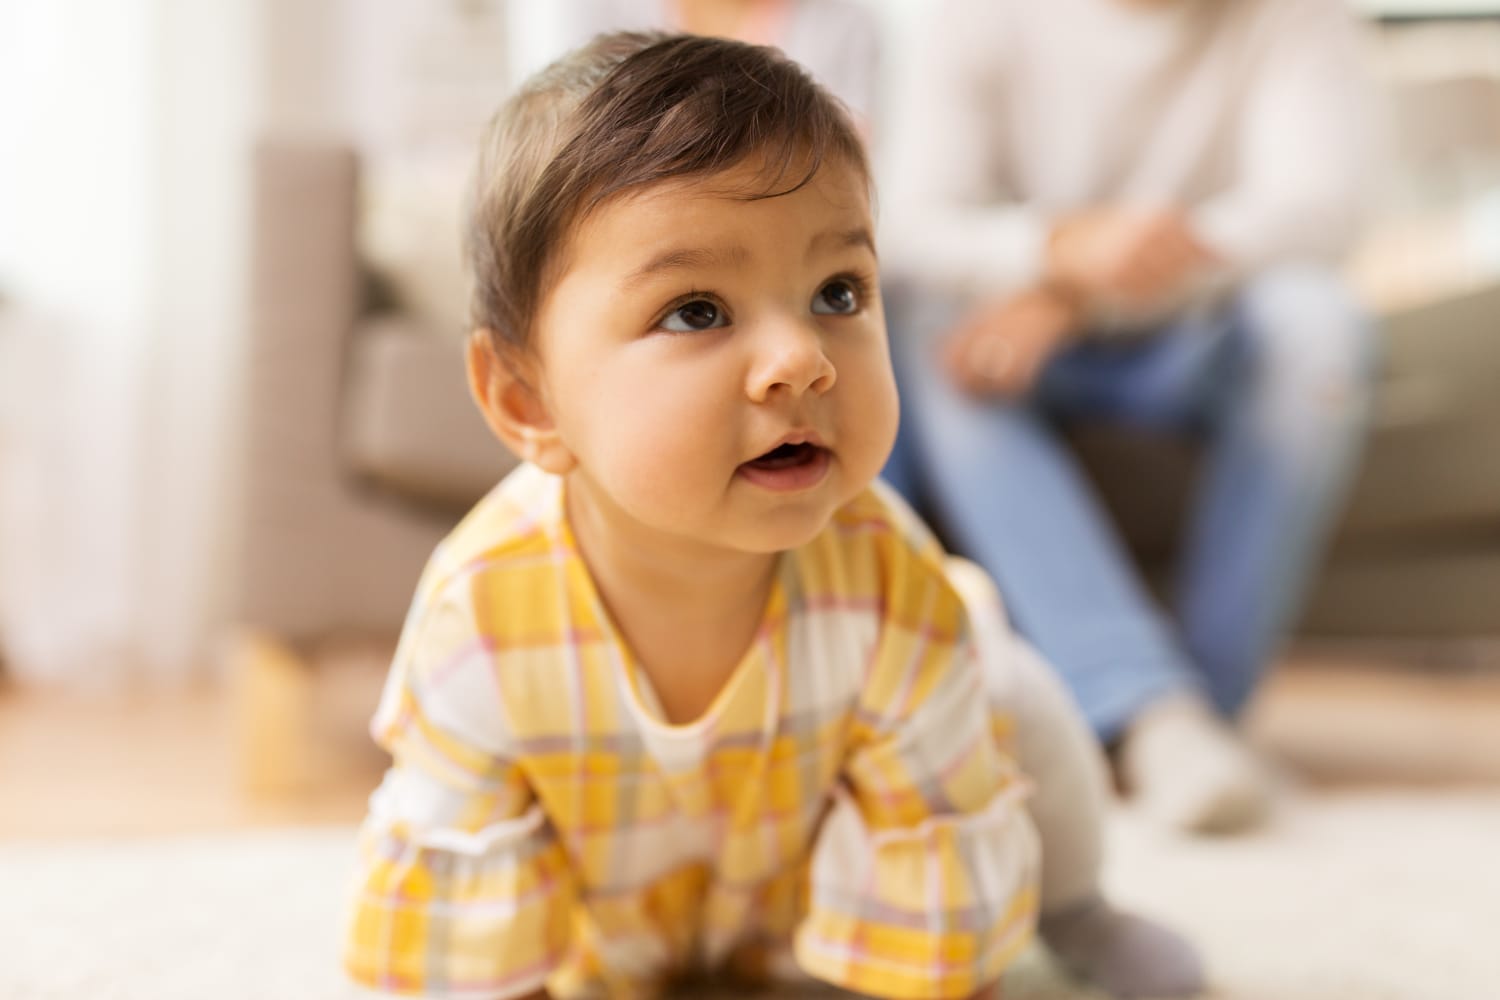 100 Spanish boy names to consider for your son